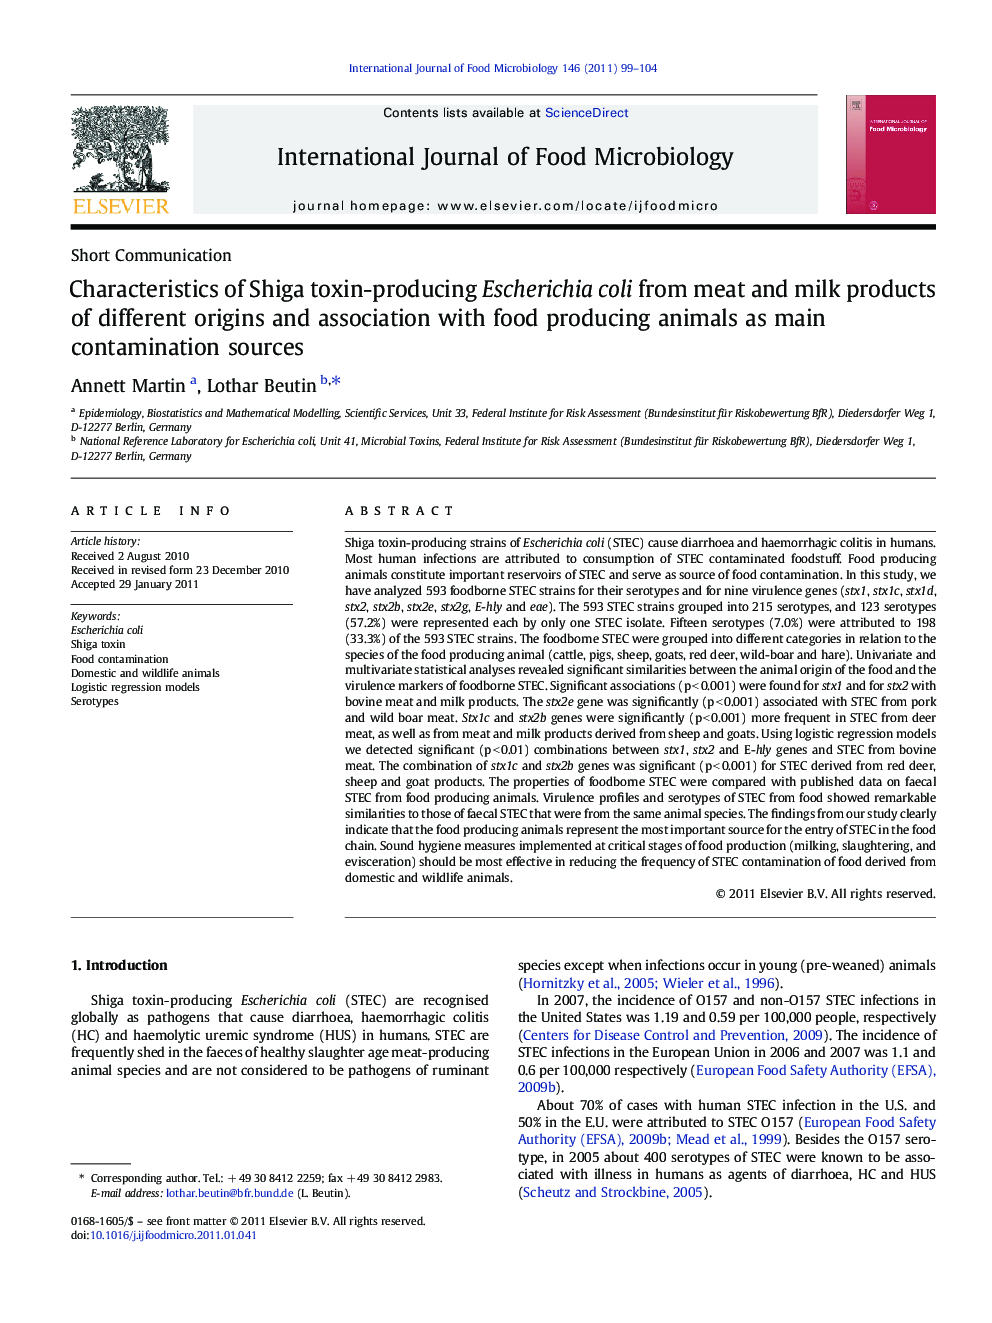 Characteristics of Shiga toxin-producing Escherichia coli from meat and milk products of different origins and association with food producing animals as main contamination sources